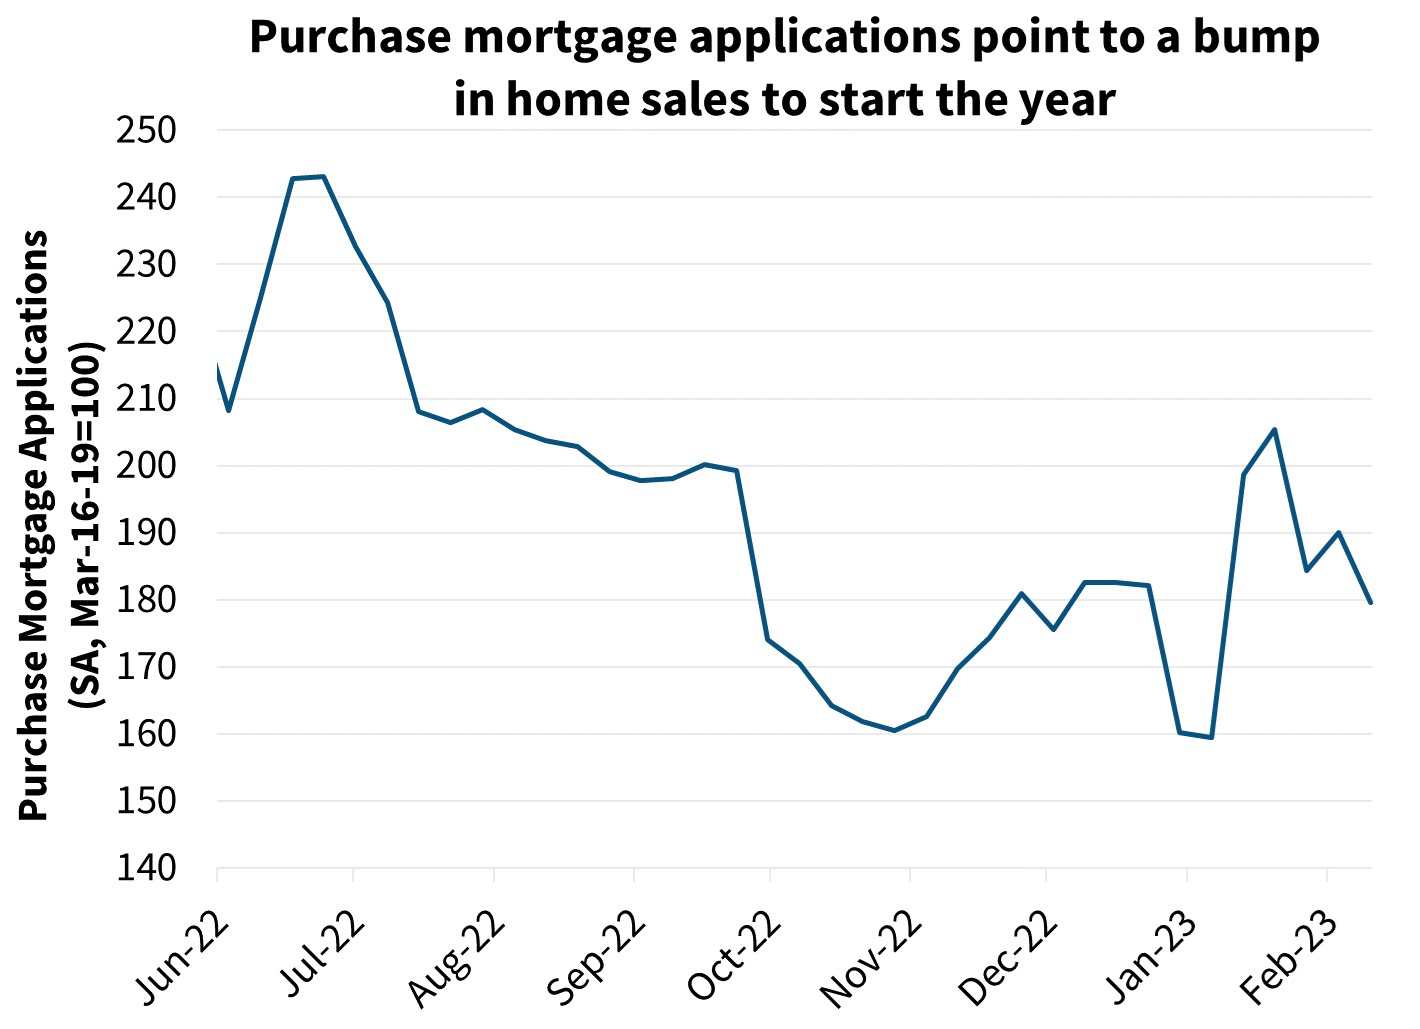  Purchase mortgage applications point to a bump in home sales to start the year 